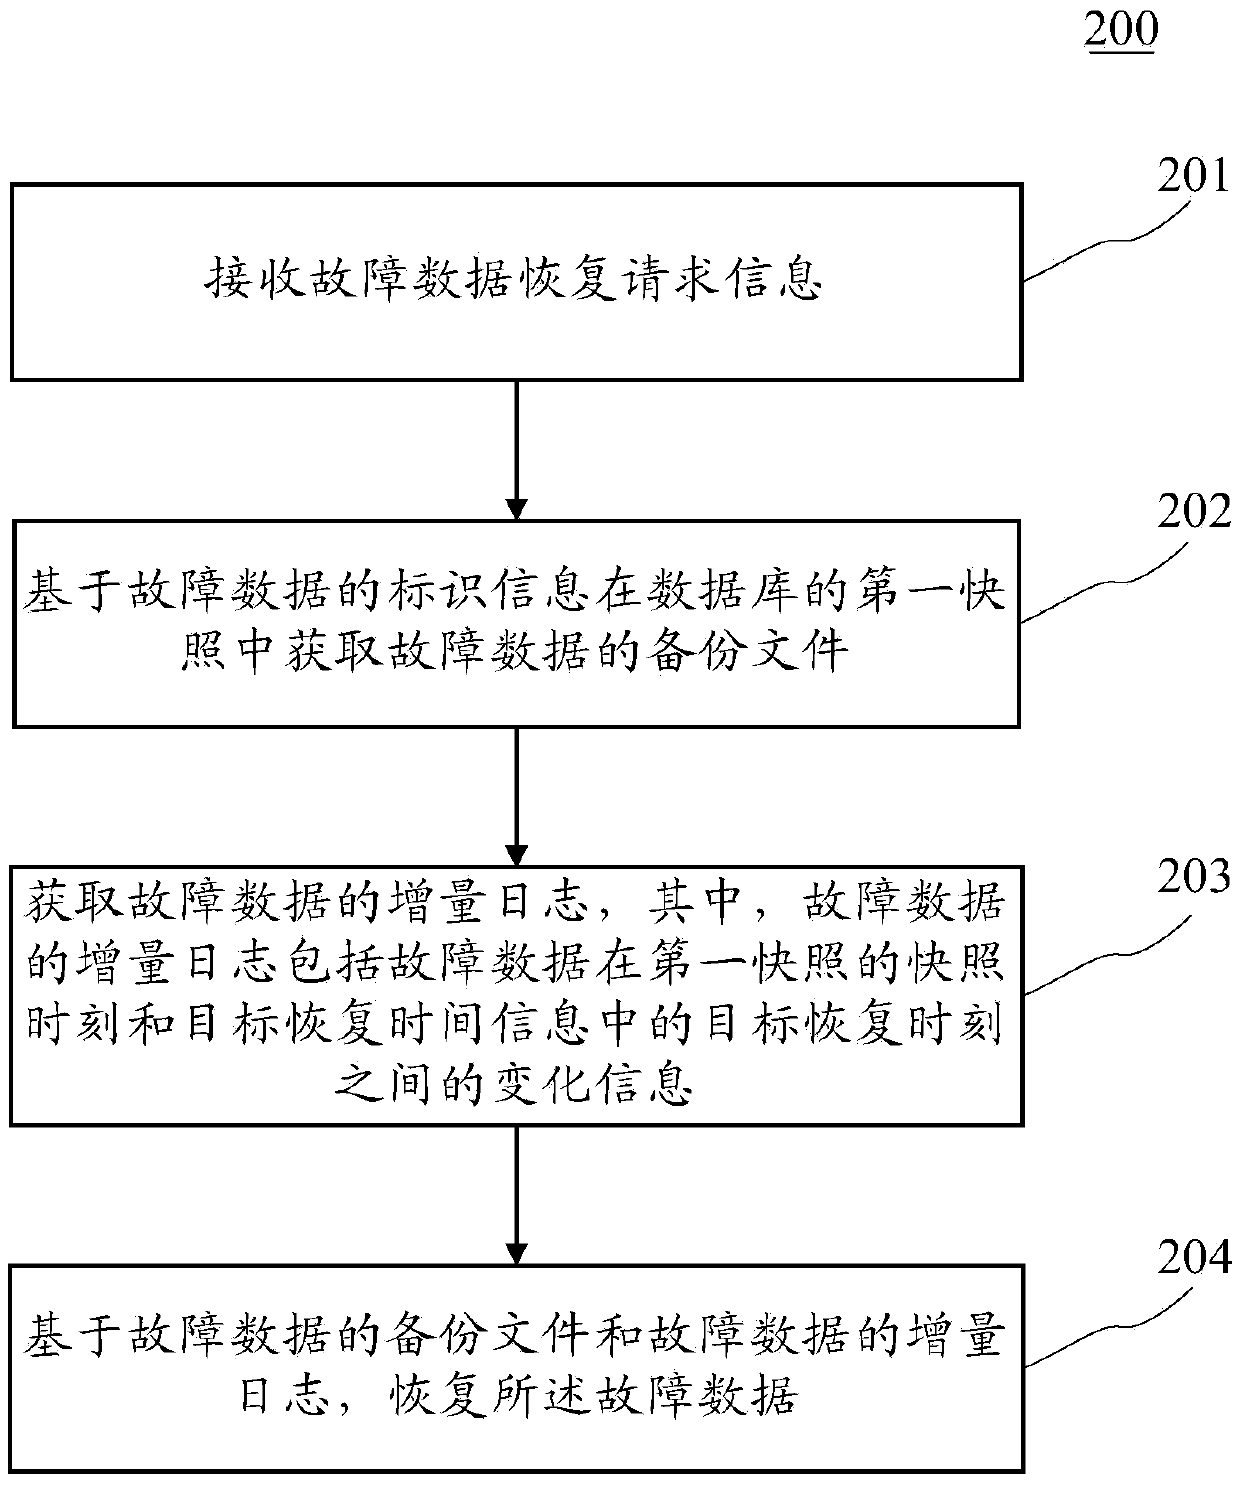 Method and system for recovering failure data in database